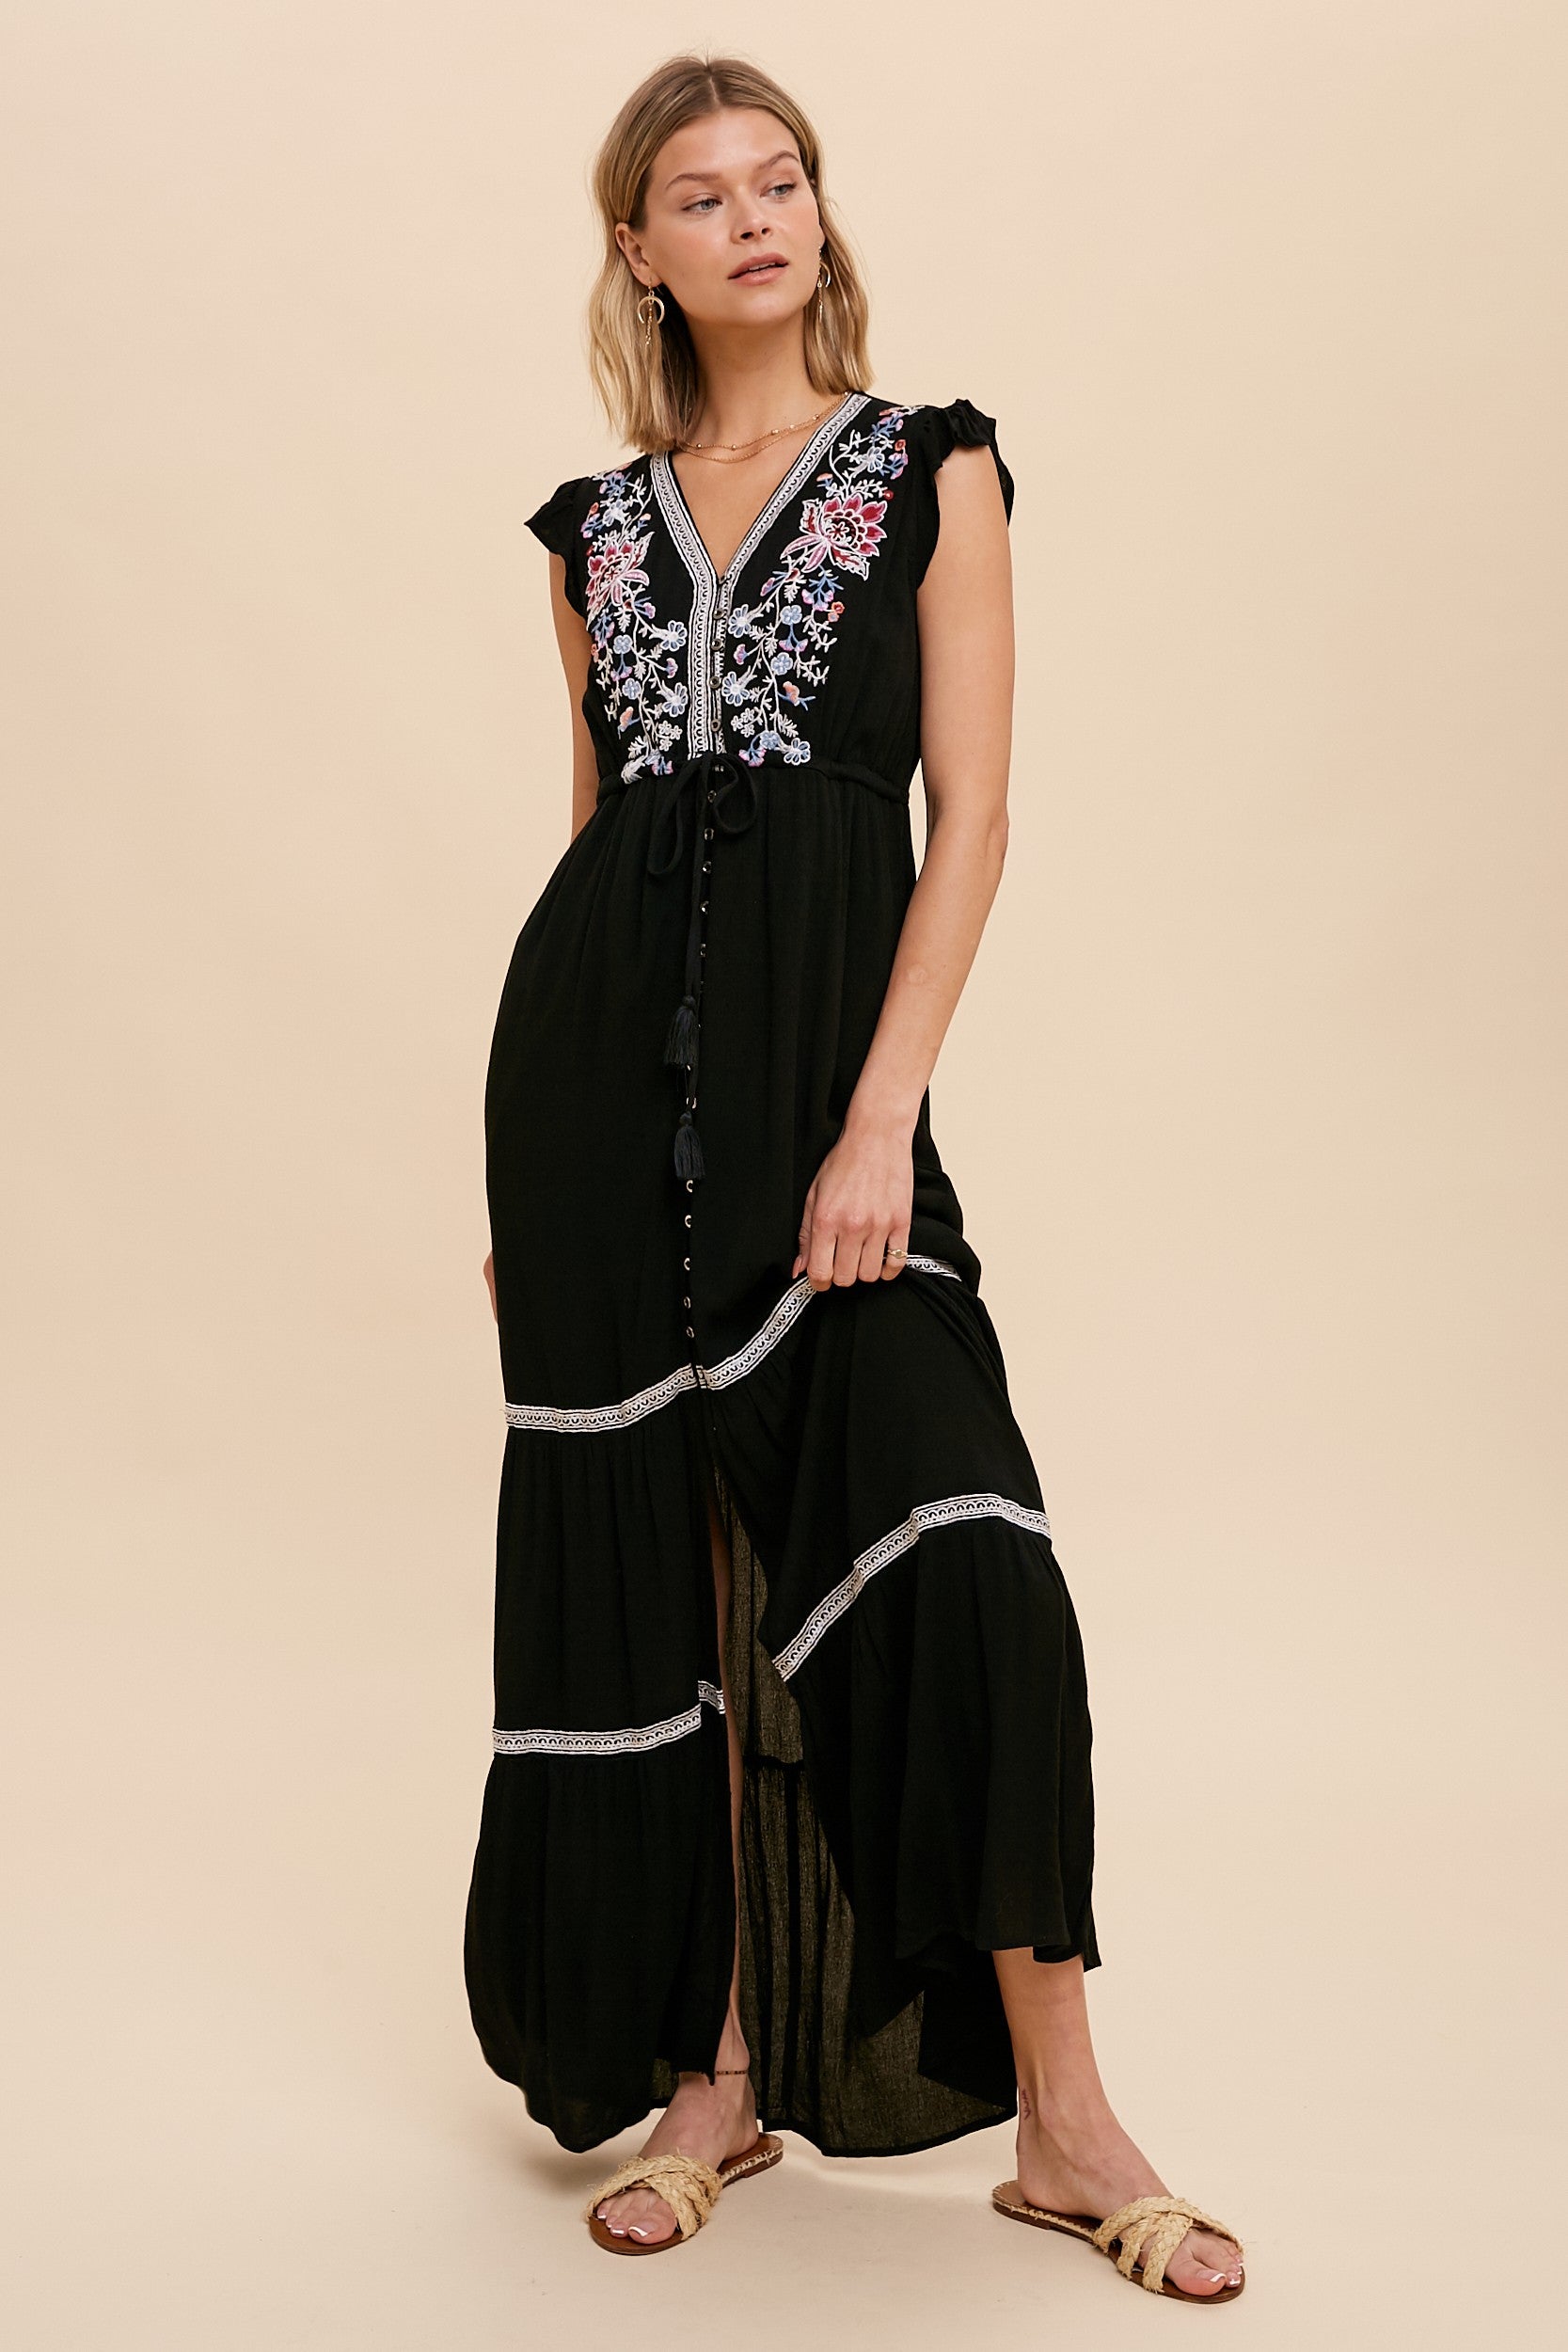 The Everlee Embroidered Maxi Dress